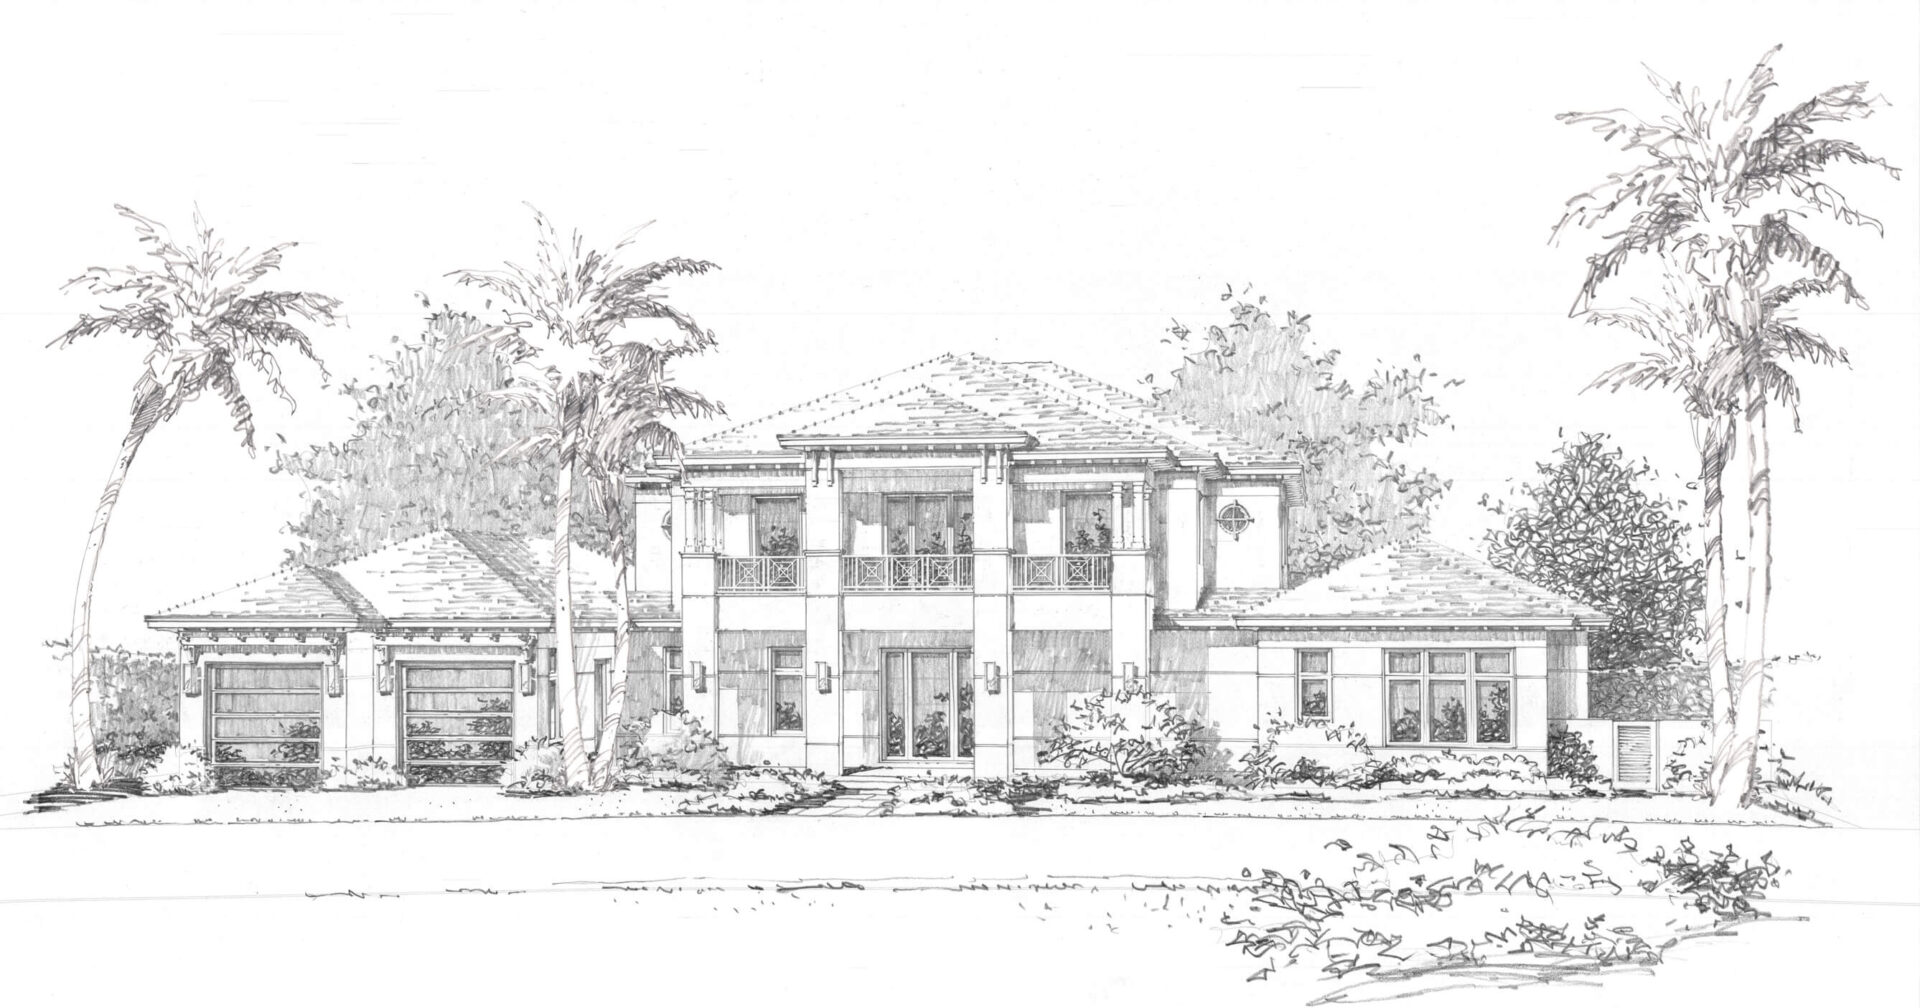 A drawing of a house with palm trees in the background.